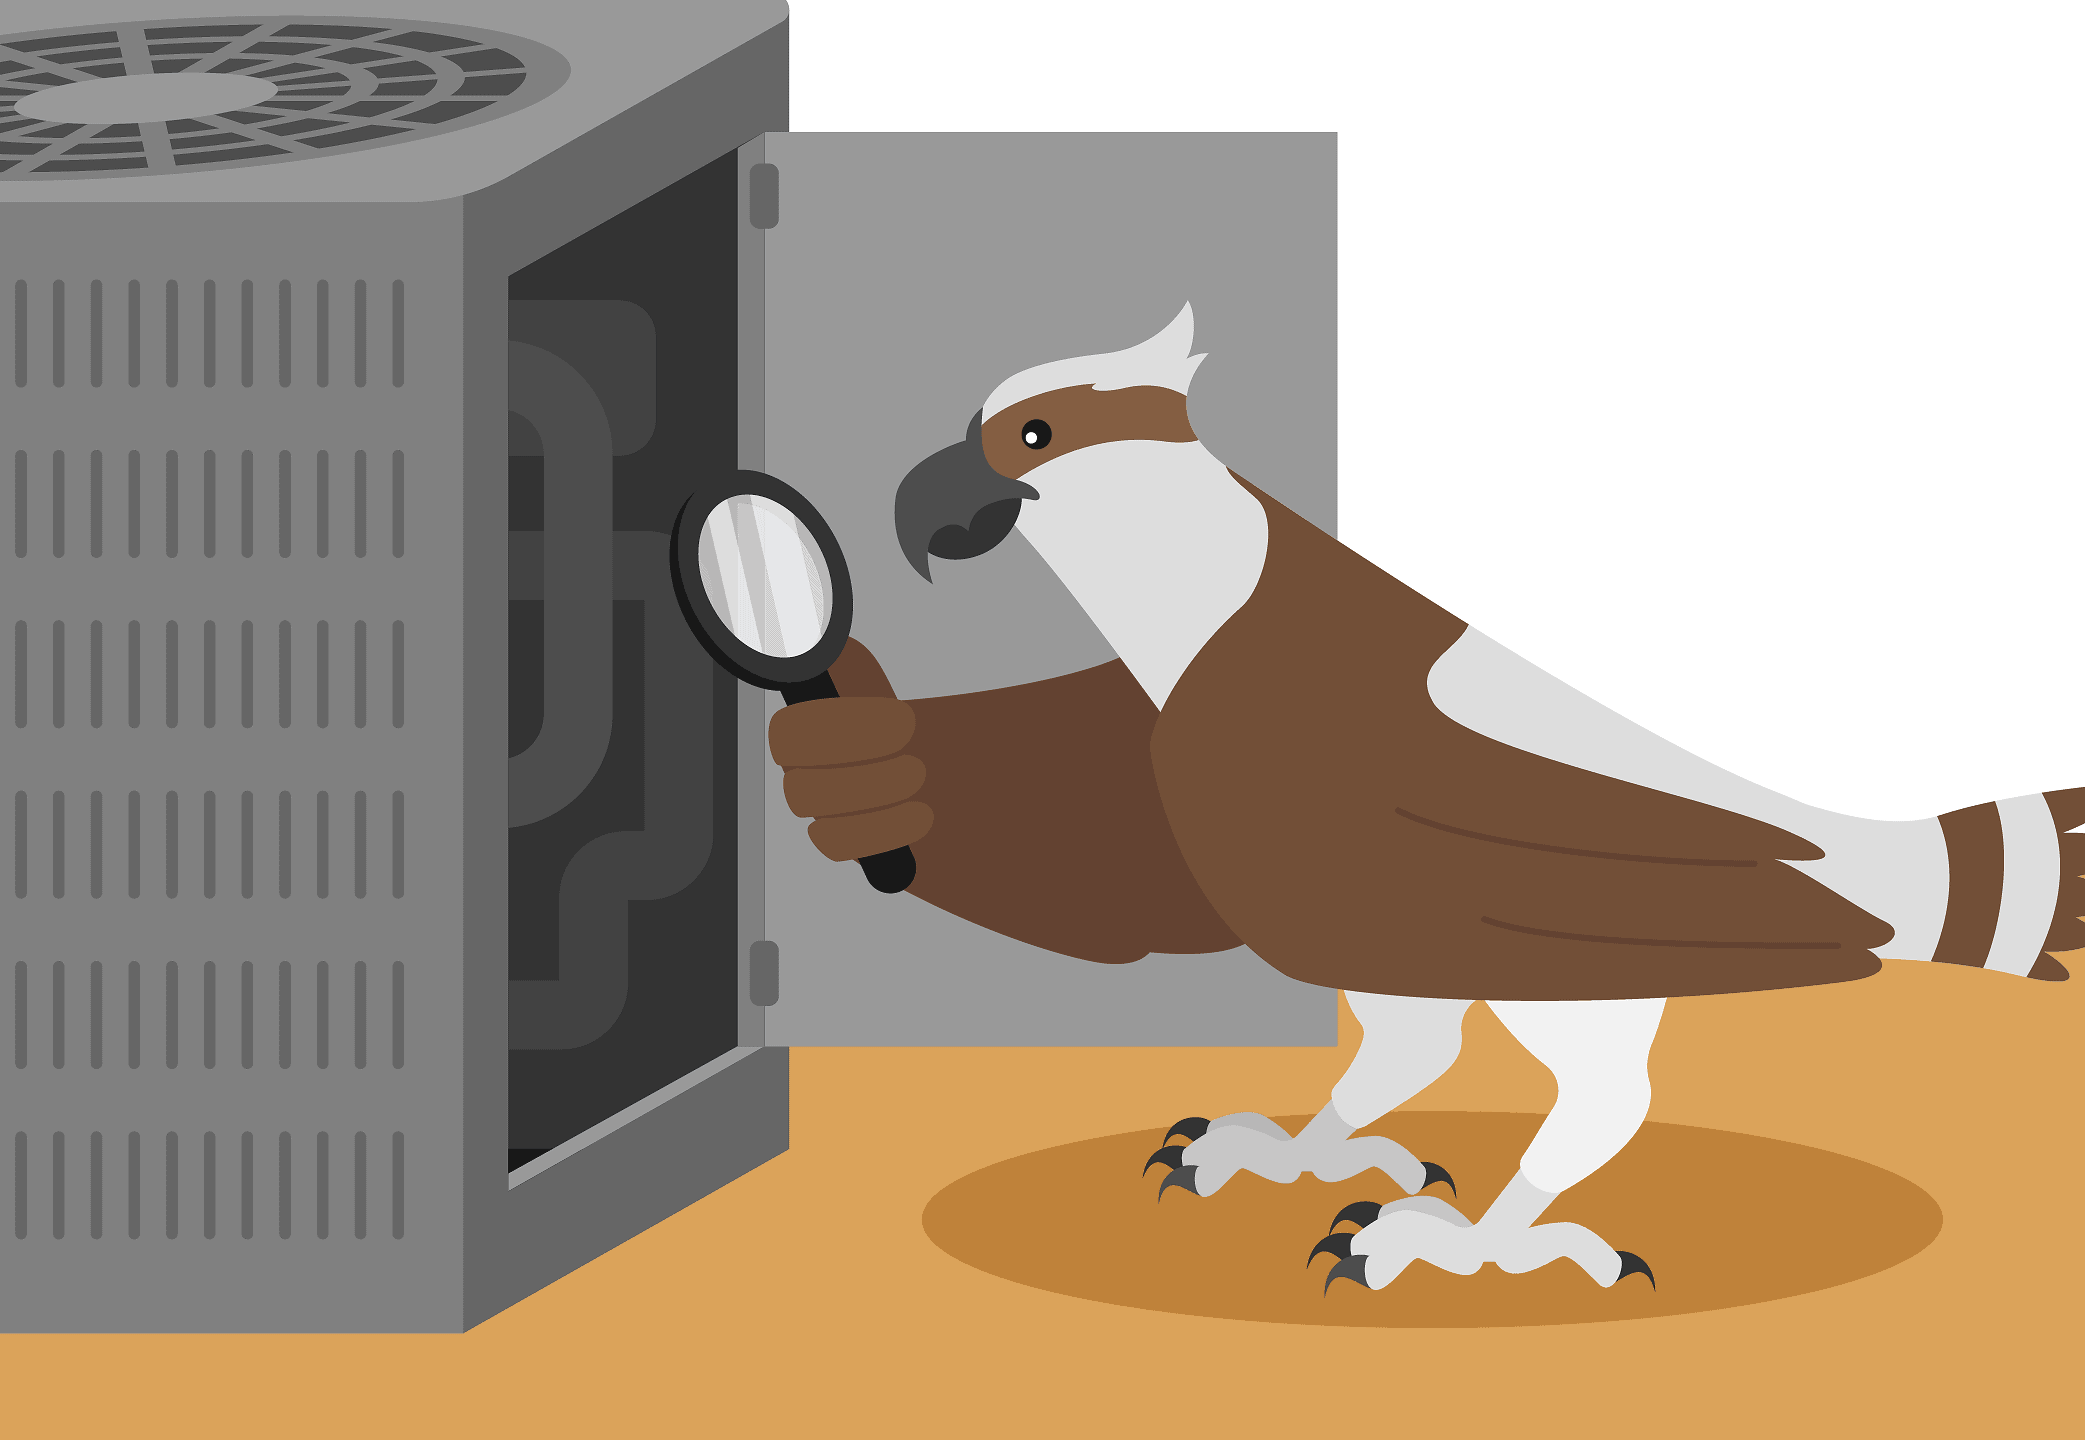 An illustrated osprey inspecting the inside of an AC unit